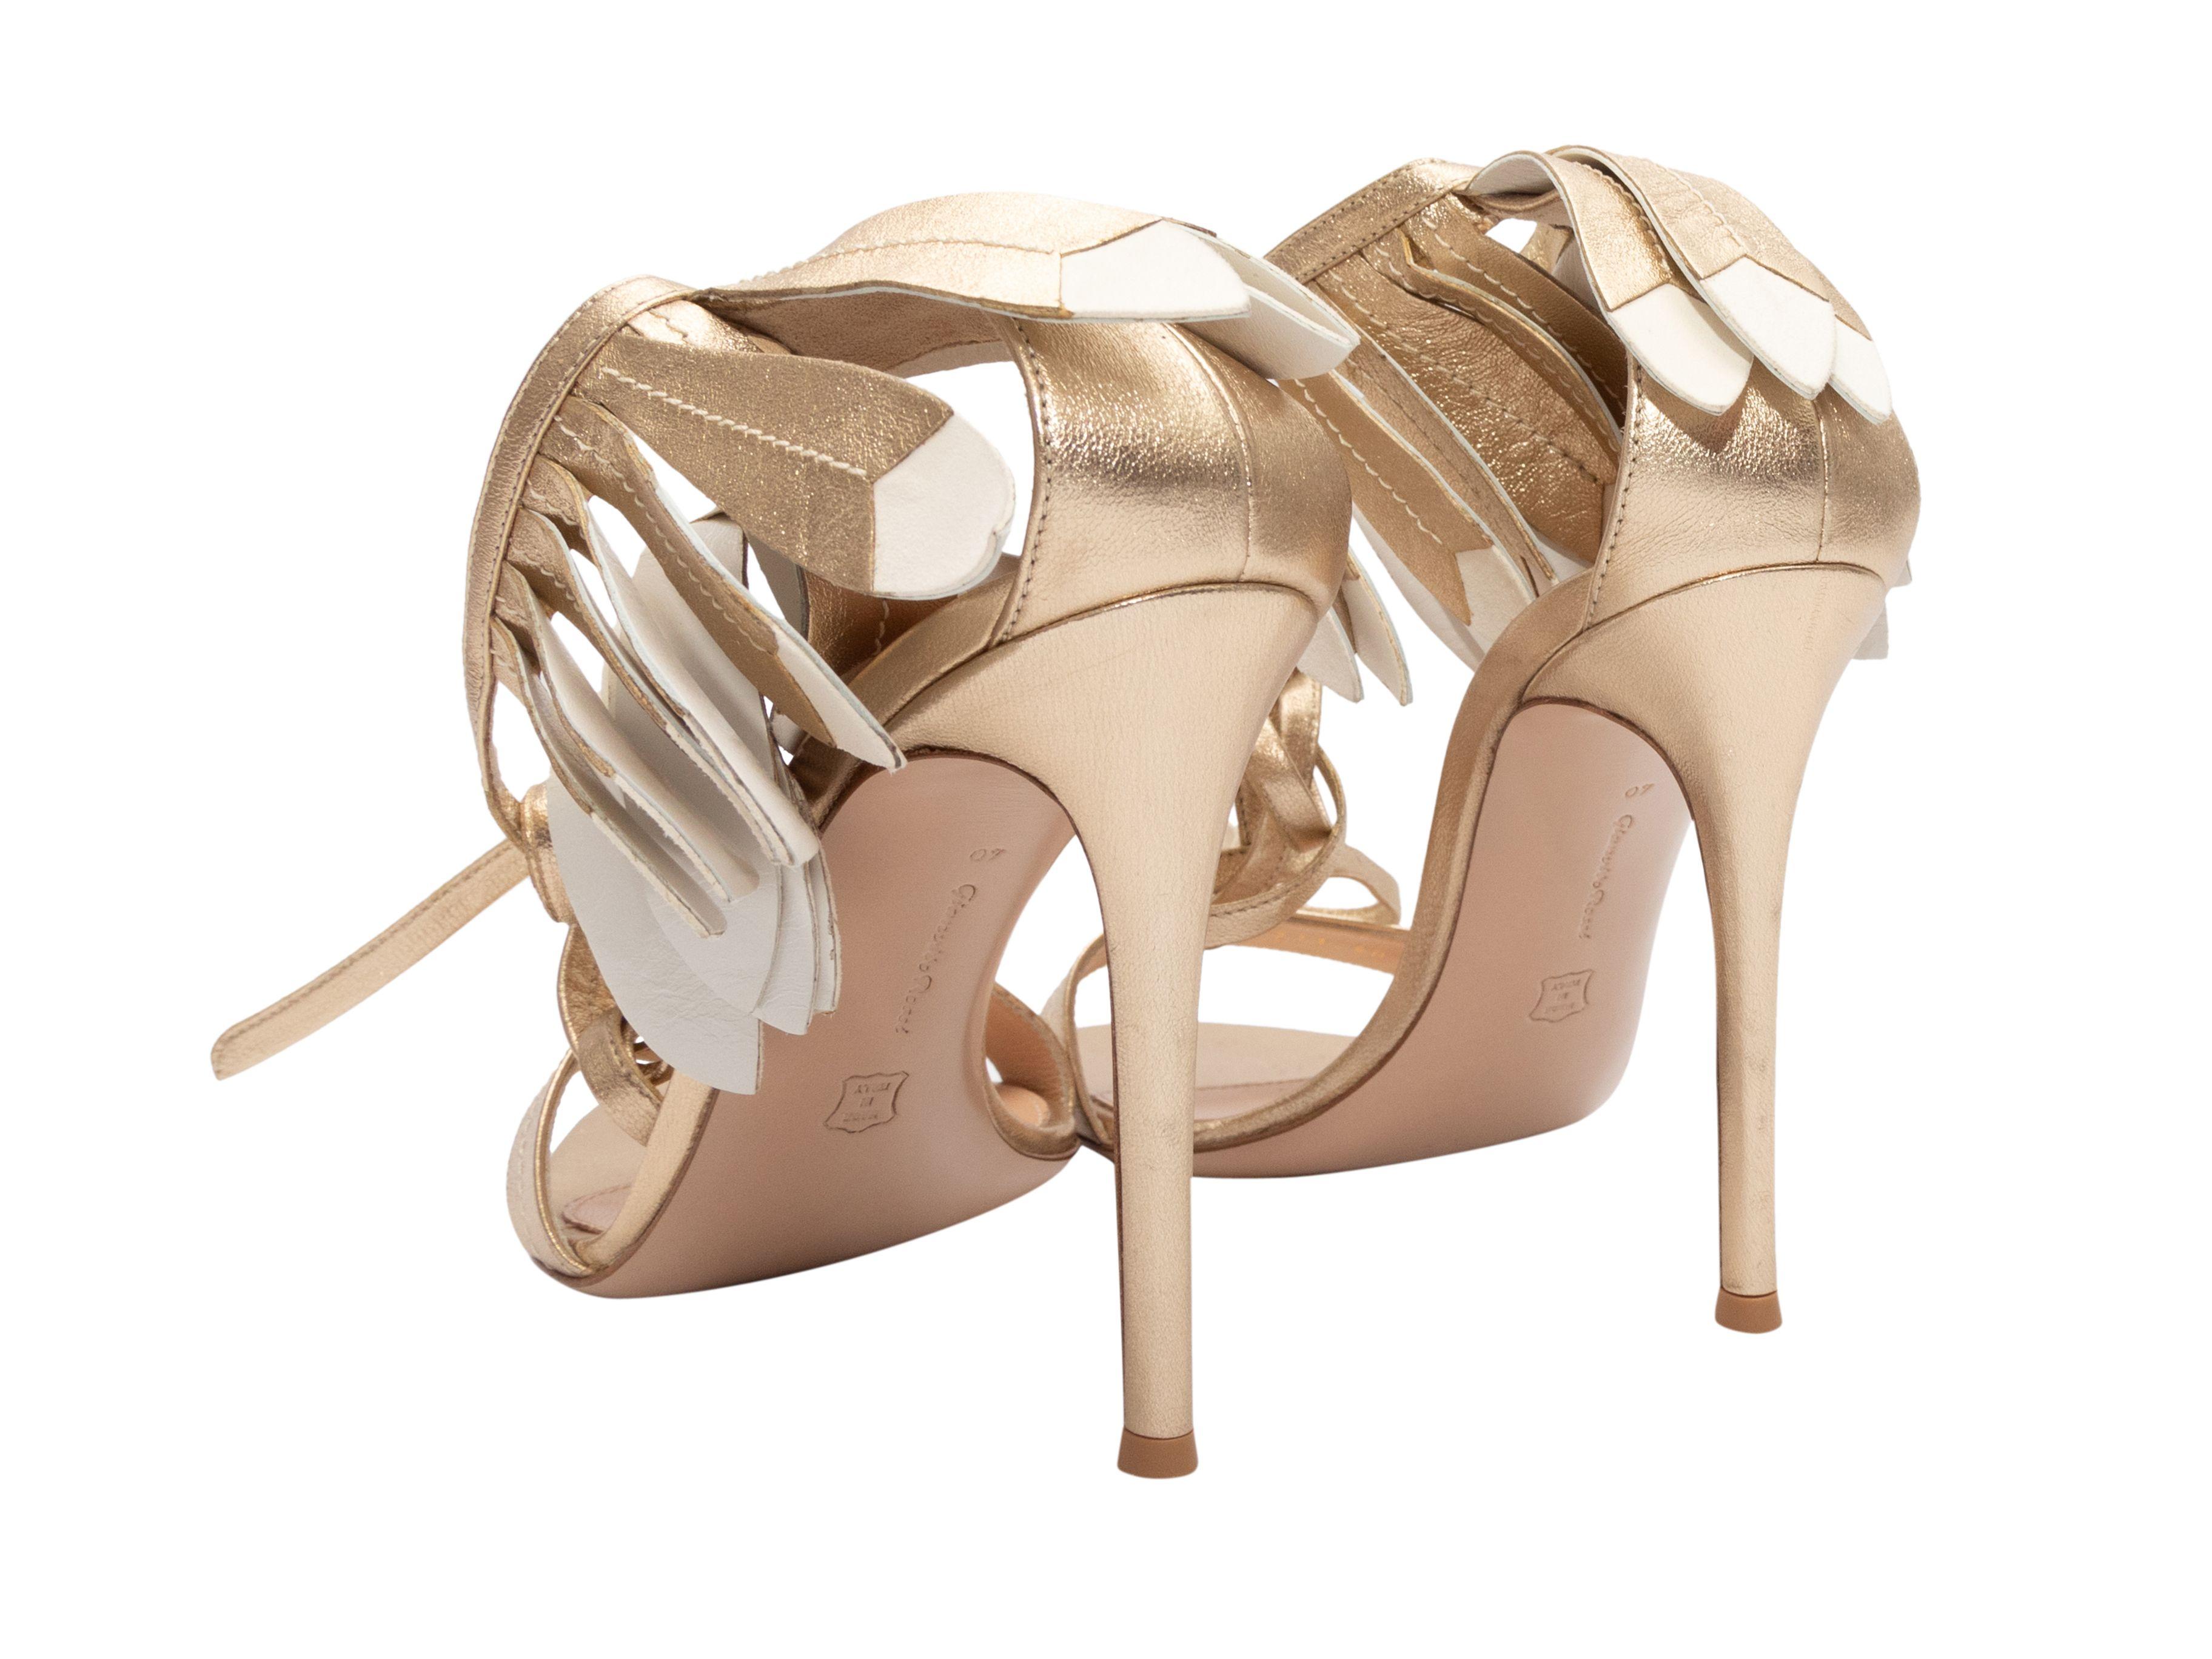 Gold and white leather fringe heeled sandals by Gianvito Rossi. Lace-up tie closures at ankles. 4.5